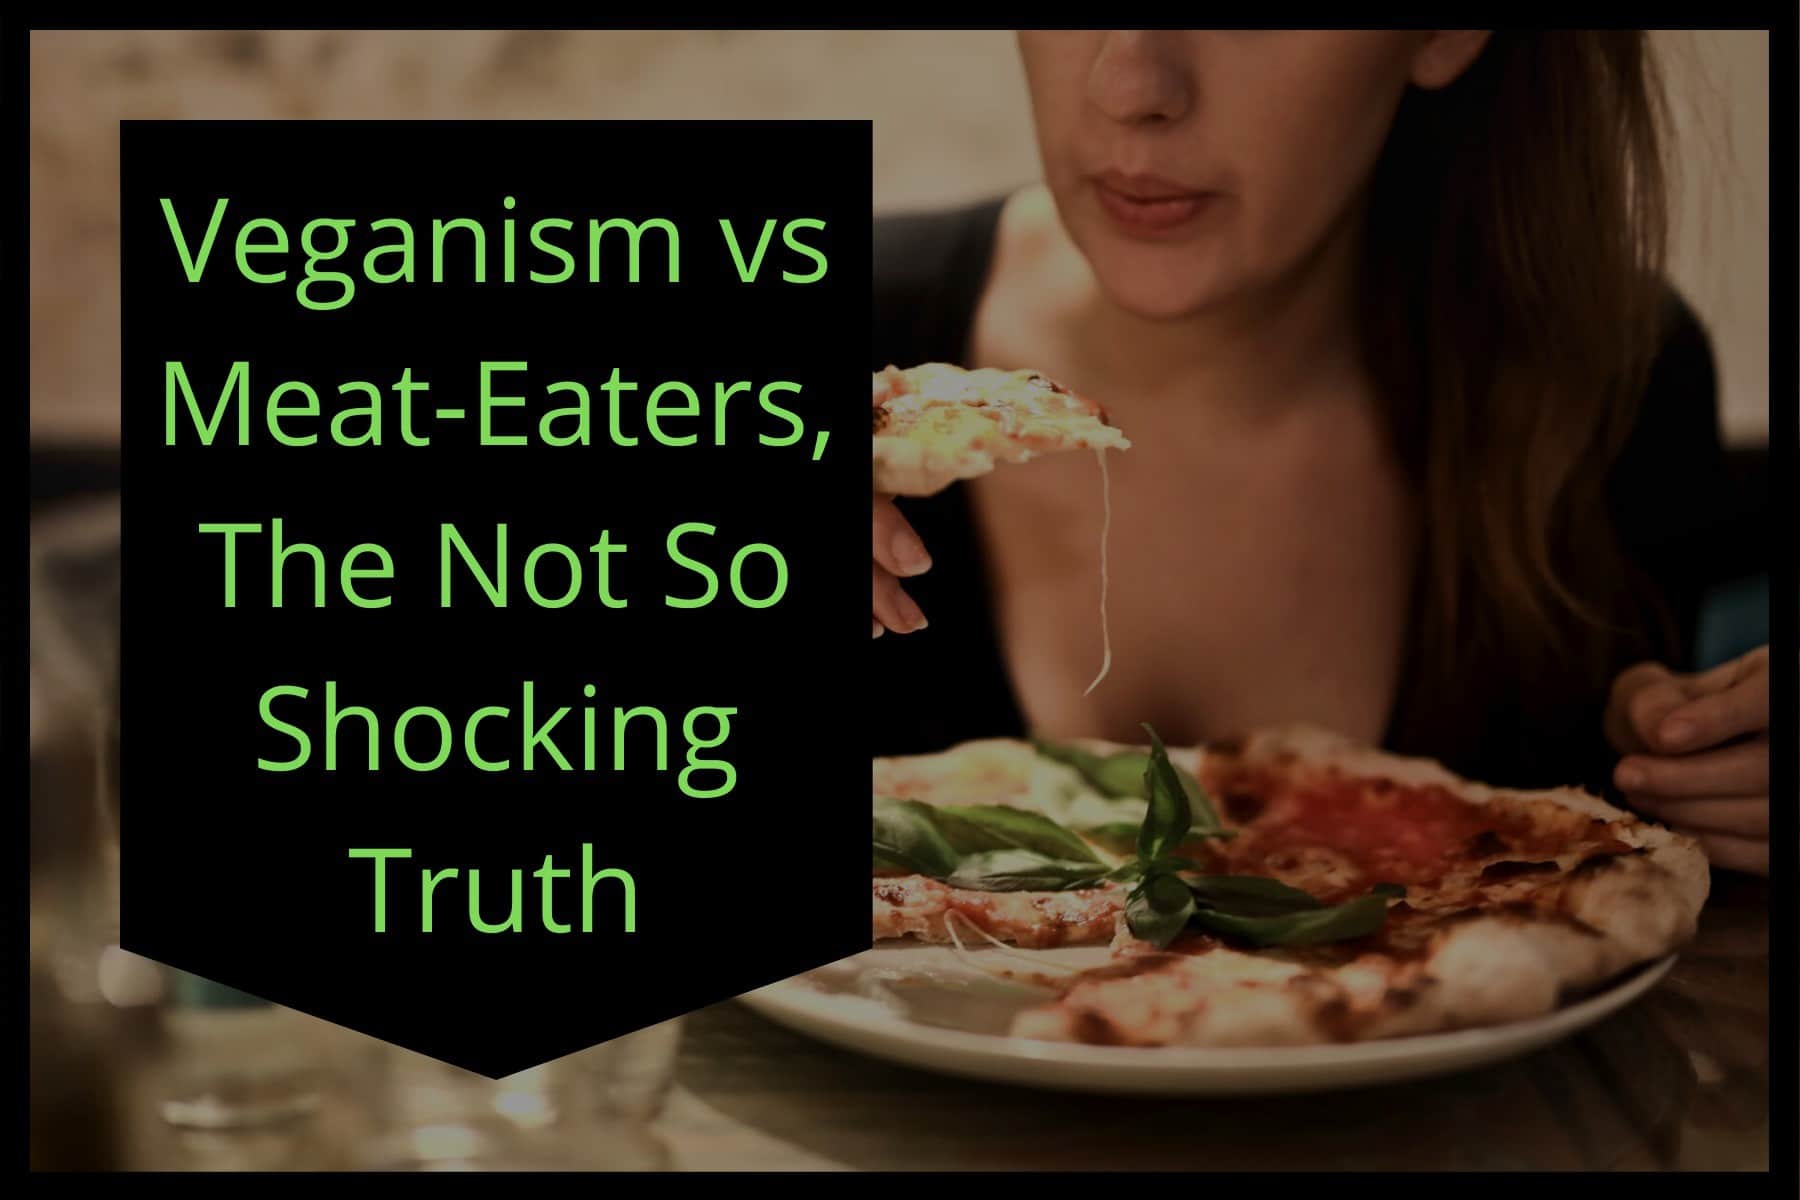 Veganism Vs Meat-Eaters, The Not So Shocking Truth